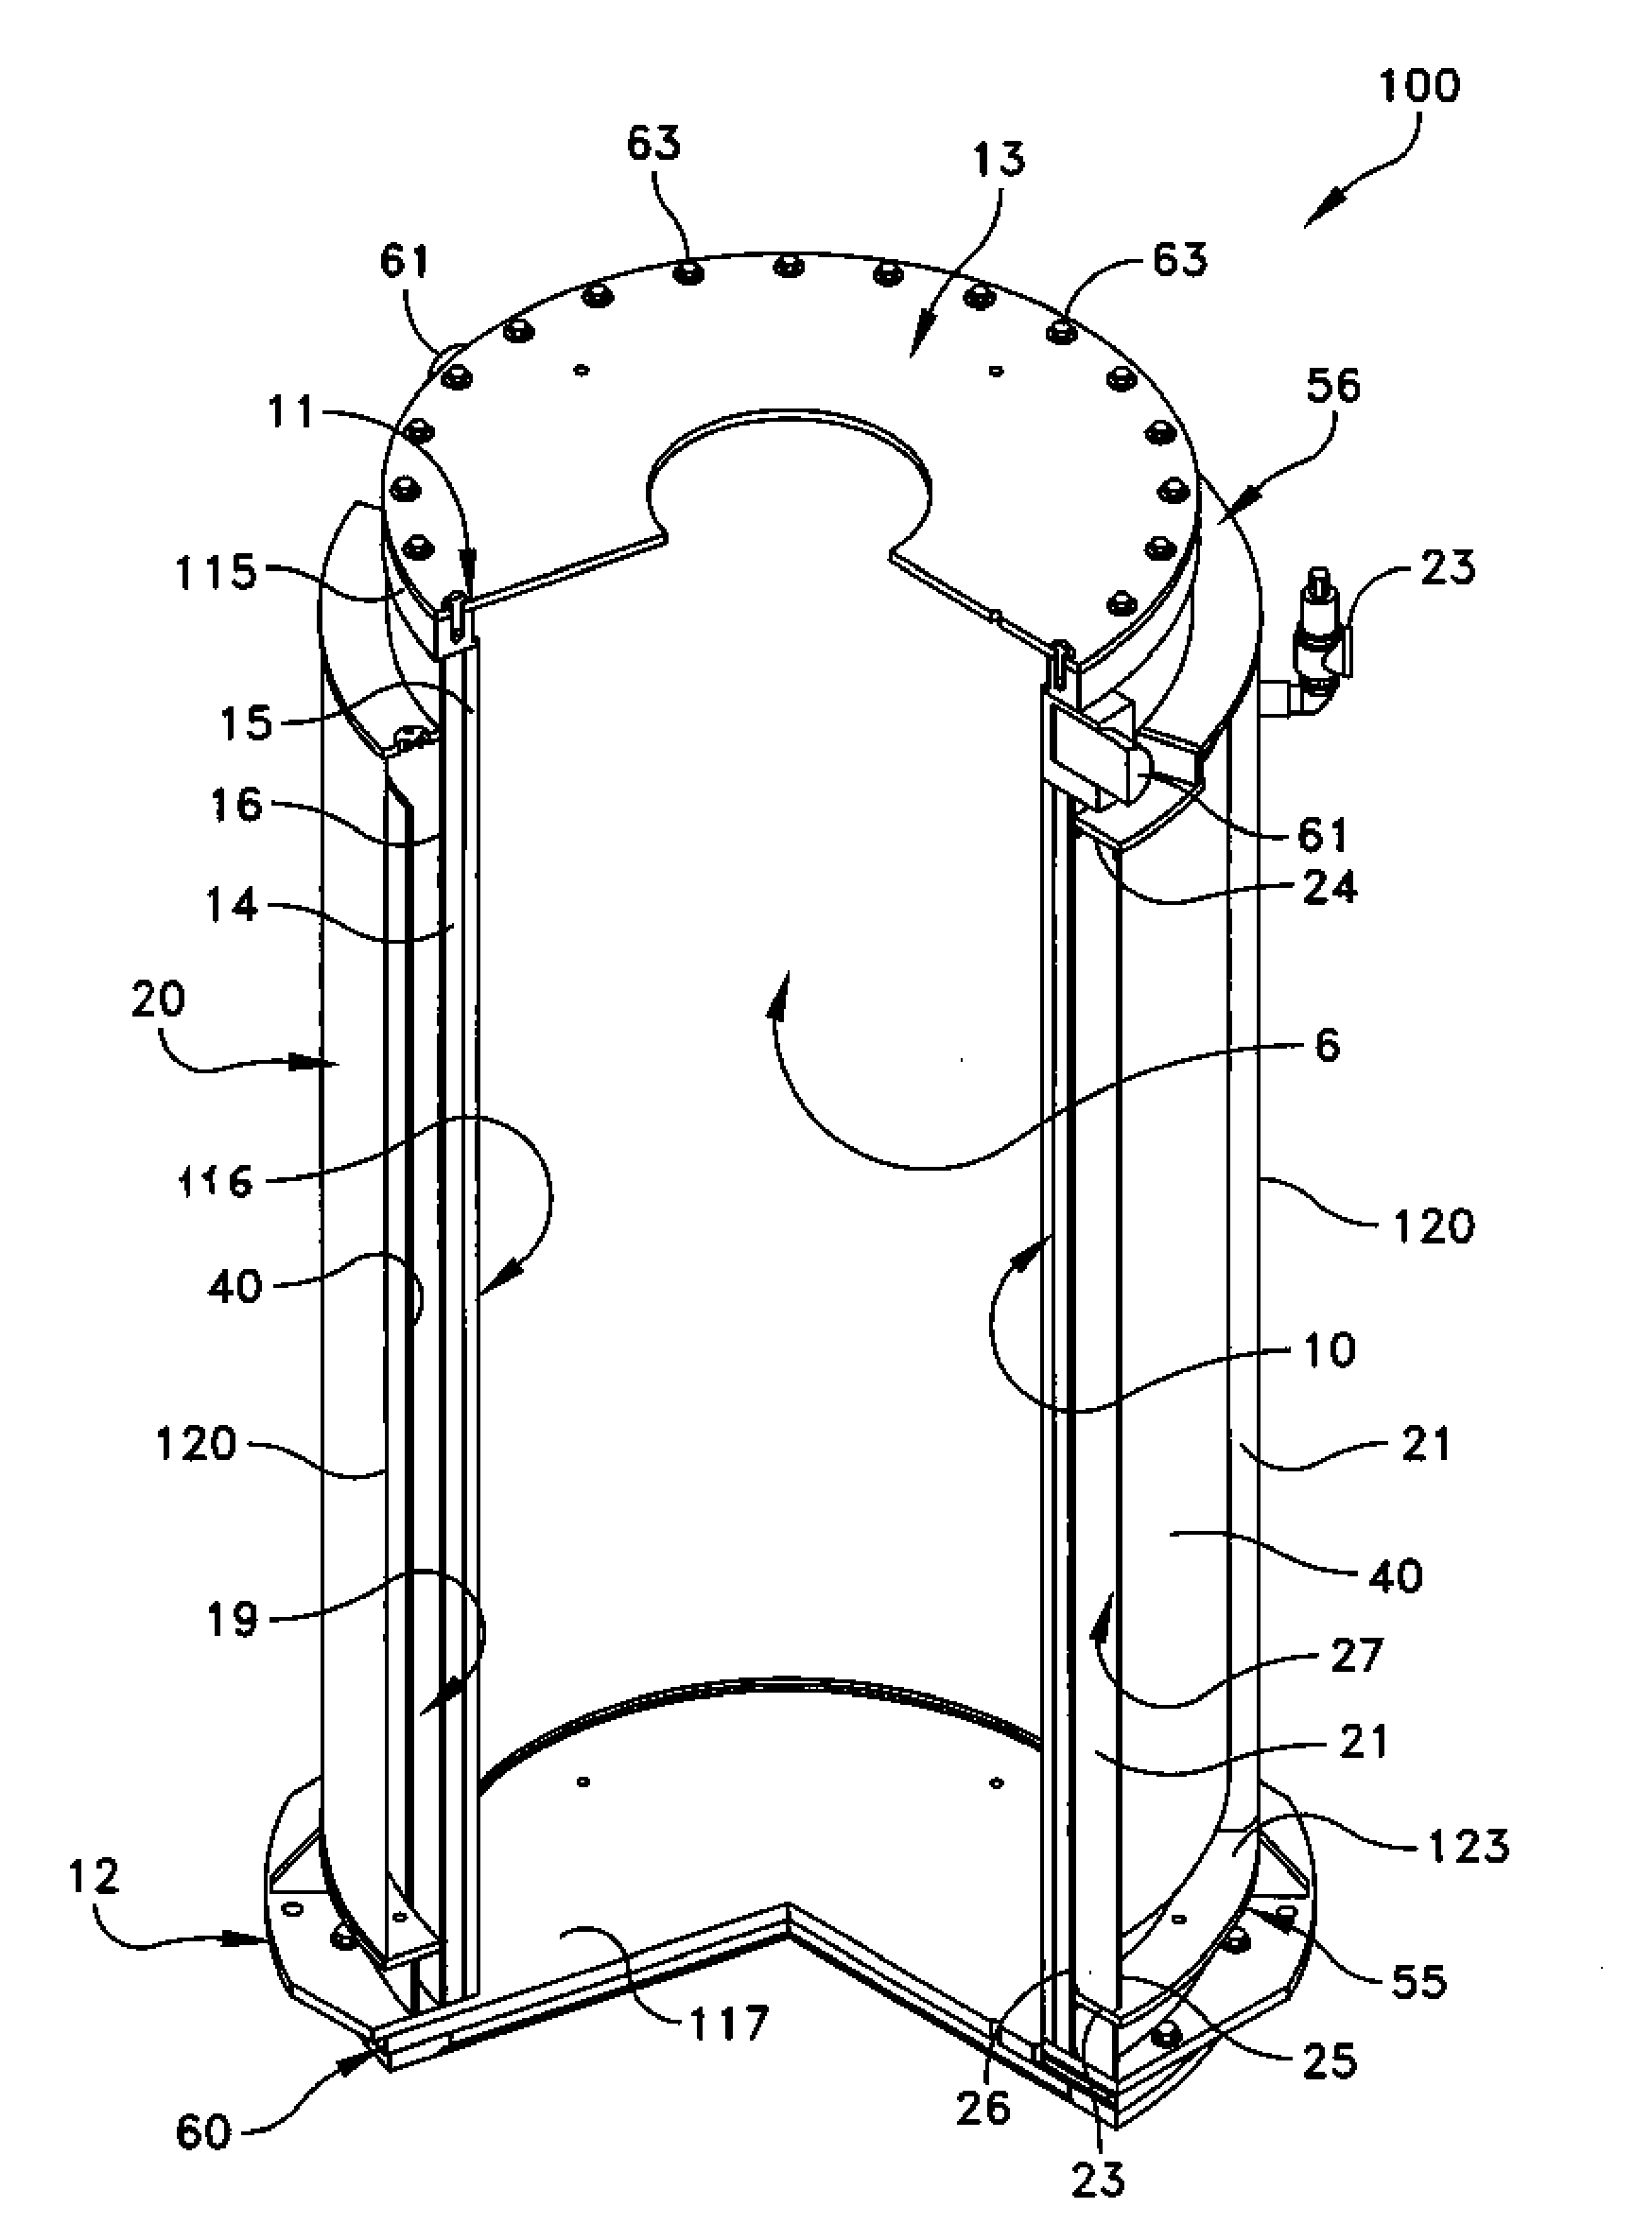 Method of removing radioactive materials from a submerged state and/or preparing spent nuclear fuel for dry storage